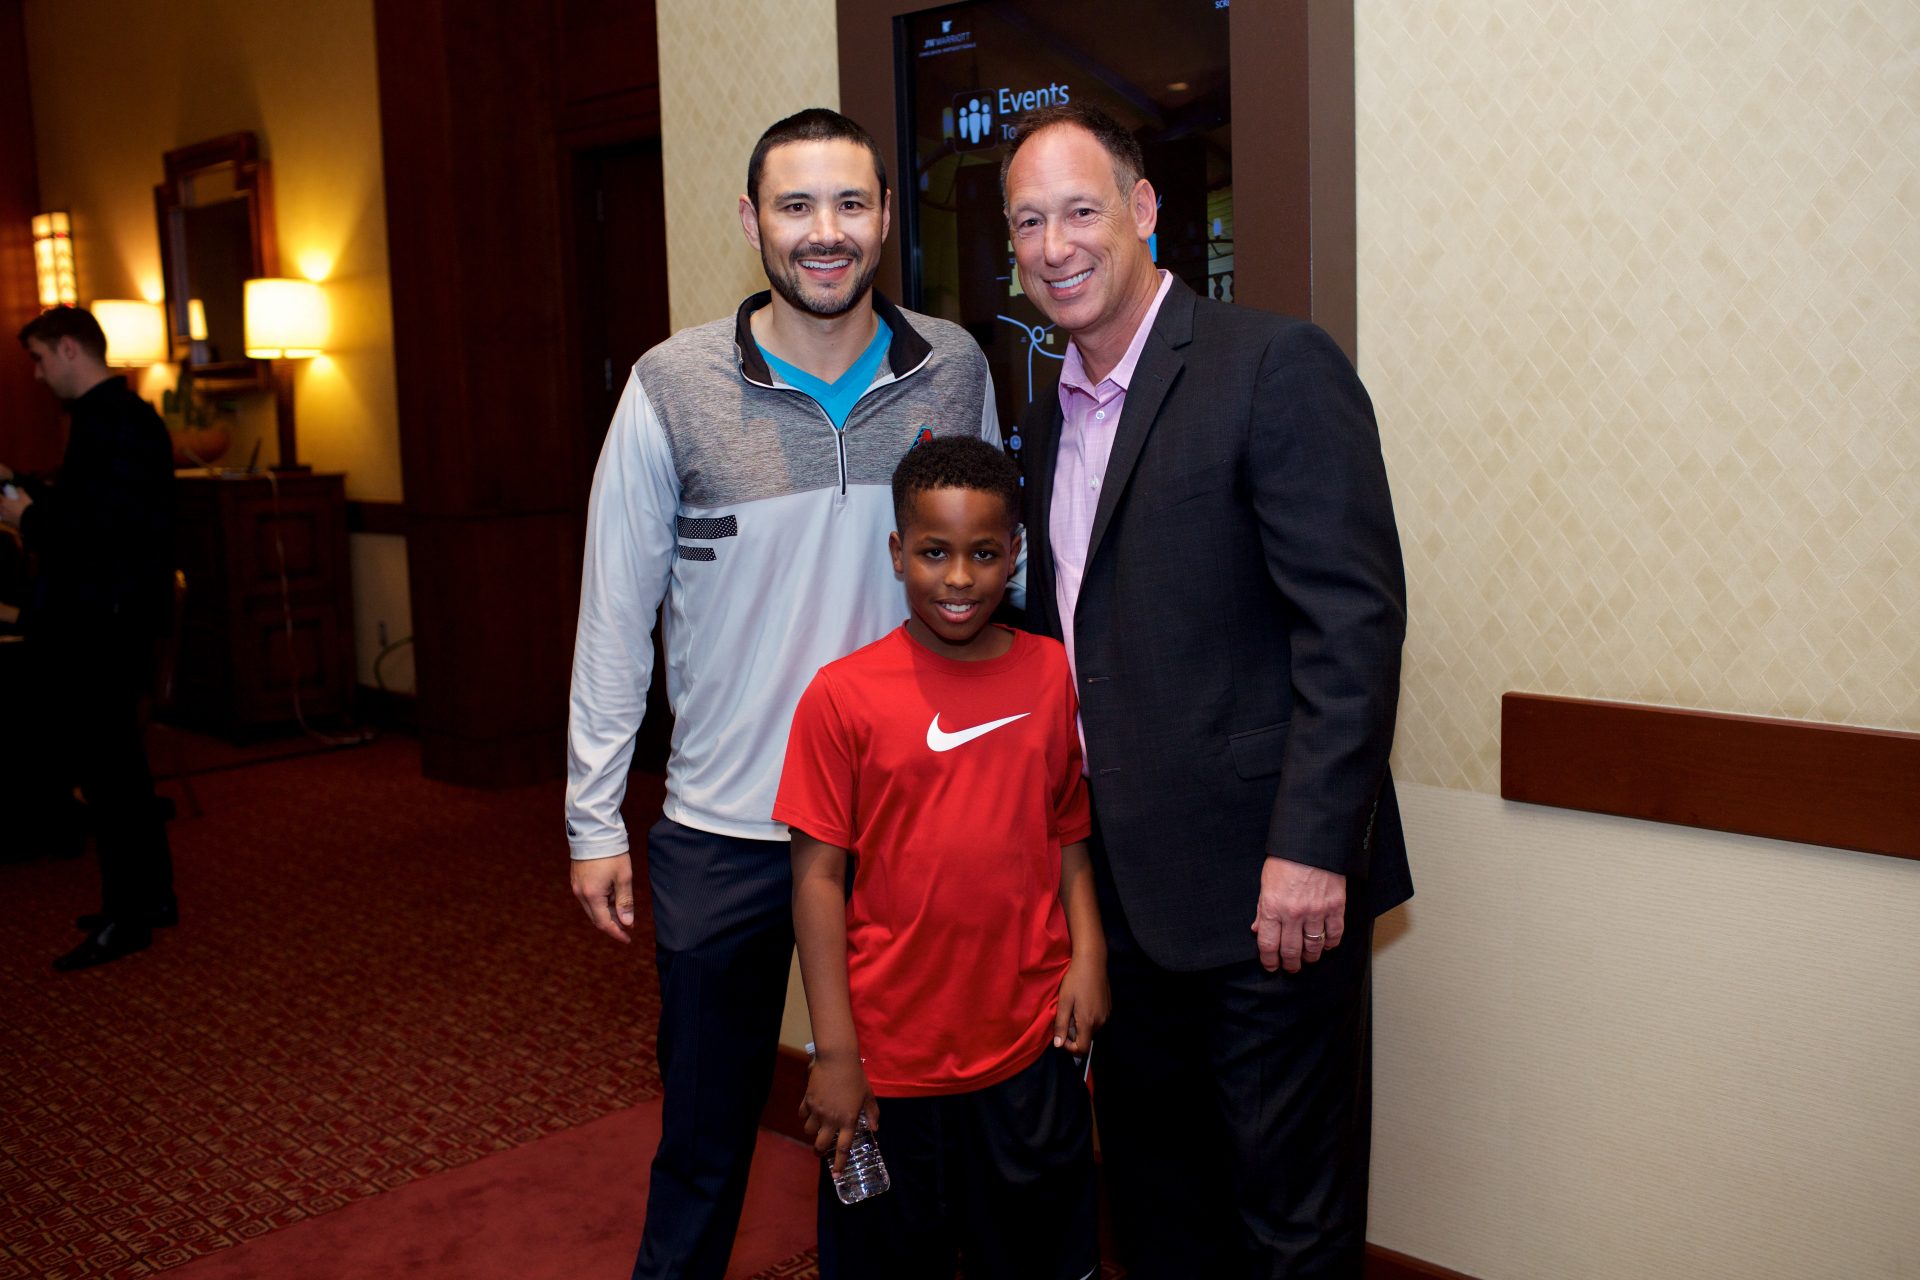 Board Member Caleb Jay with Luis Gonzalez and Caleb's Little